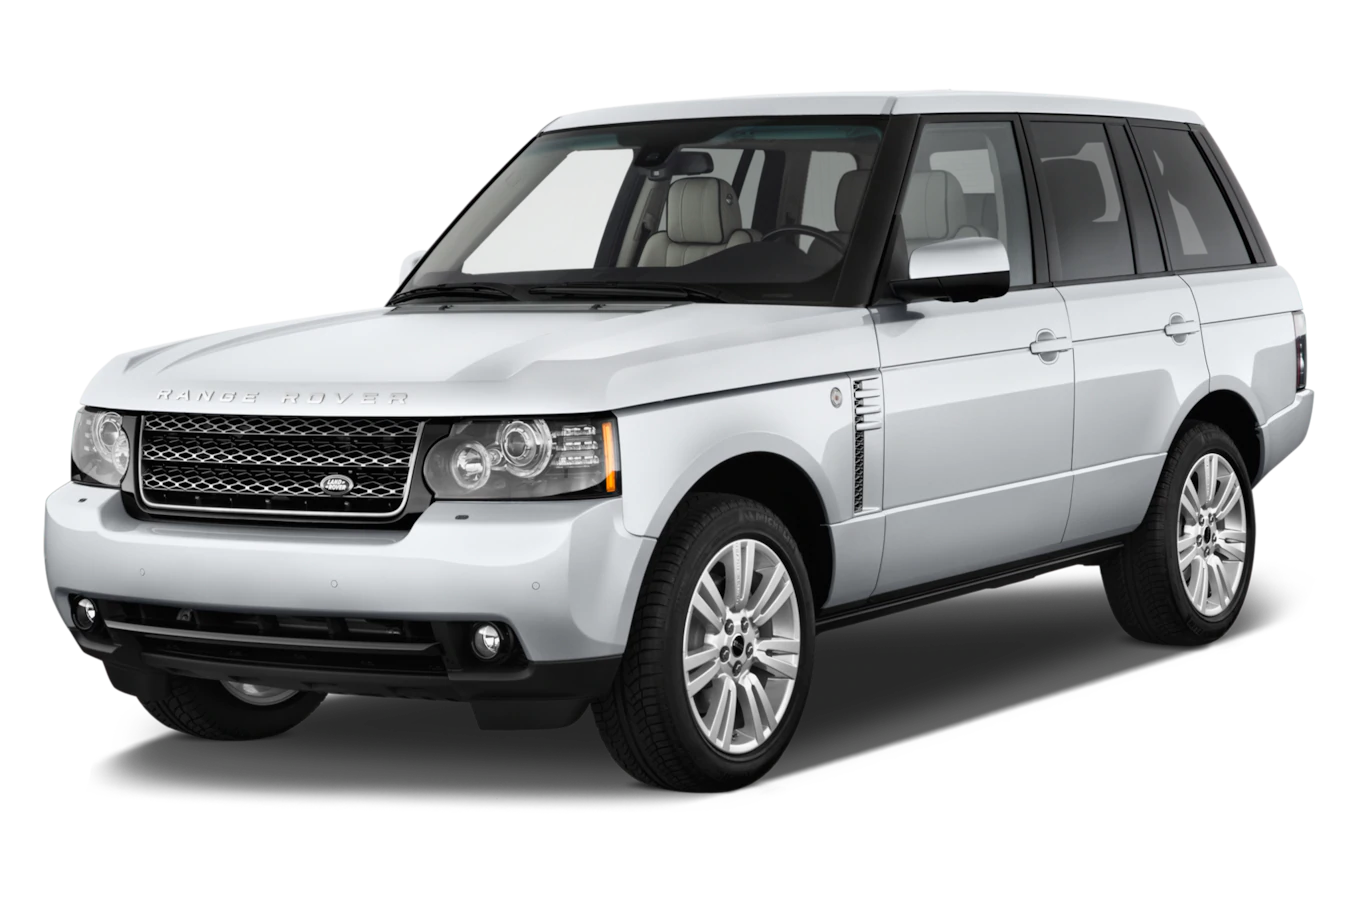 2012-land-rover-rangerover-hse-suv-angular-front.png